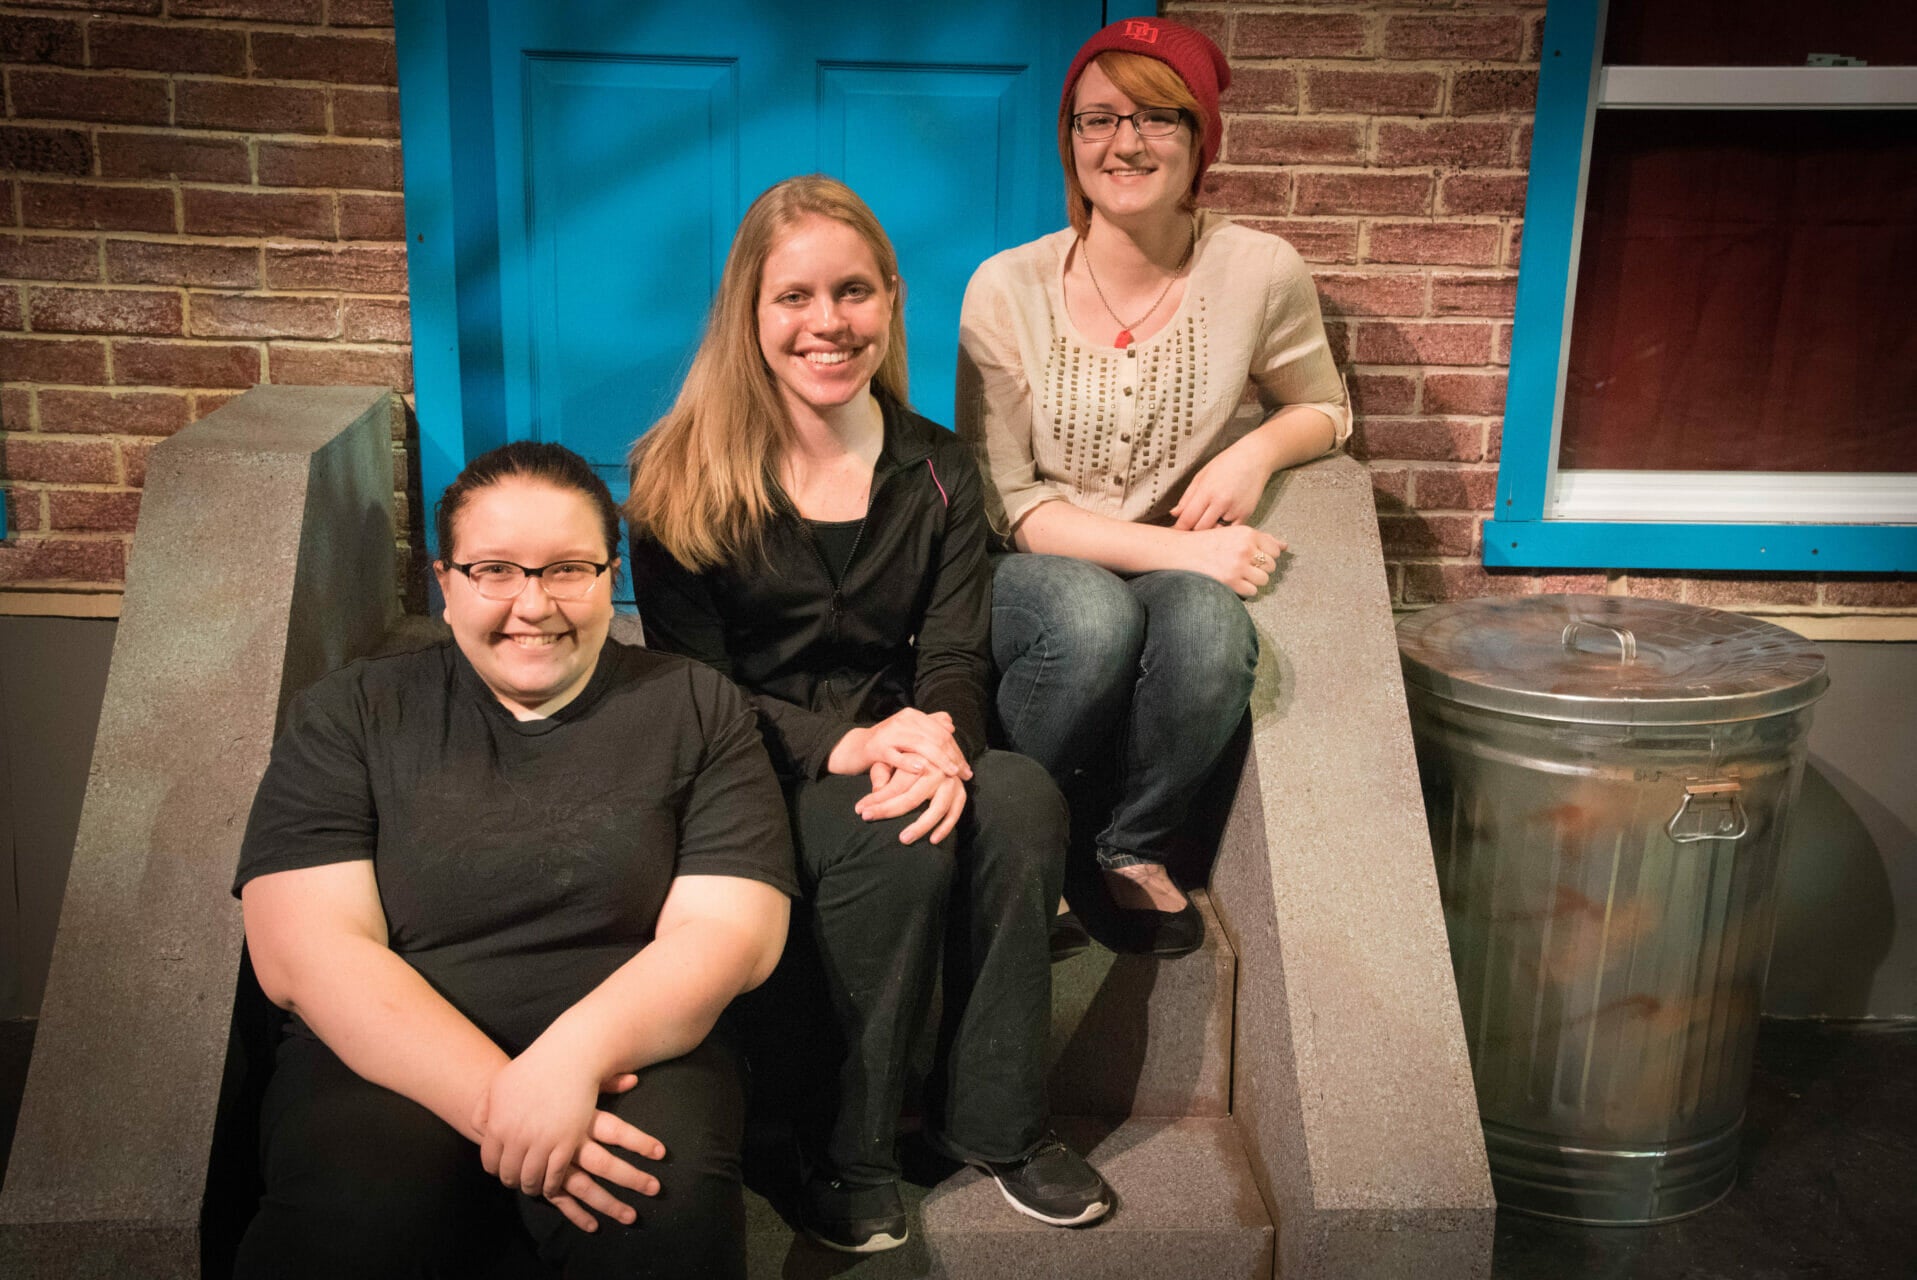 Stage crew for VPA production of Avenue Q (Spring 2016)